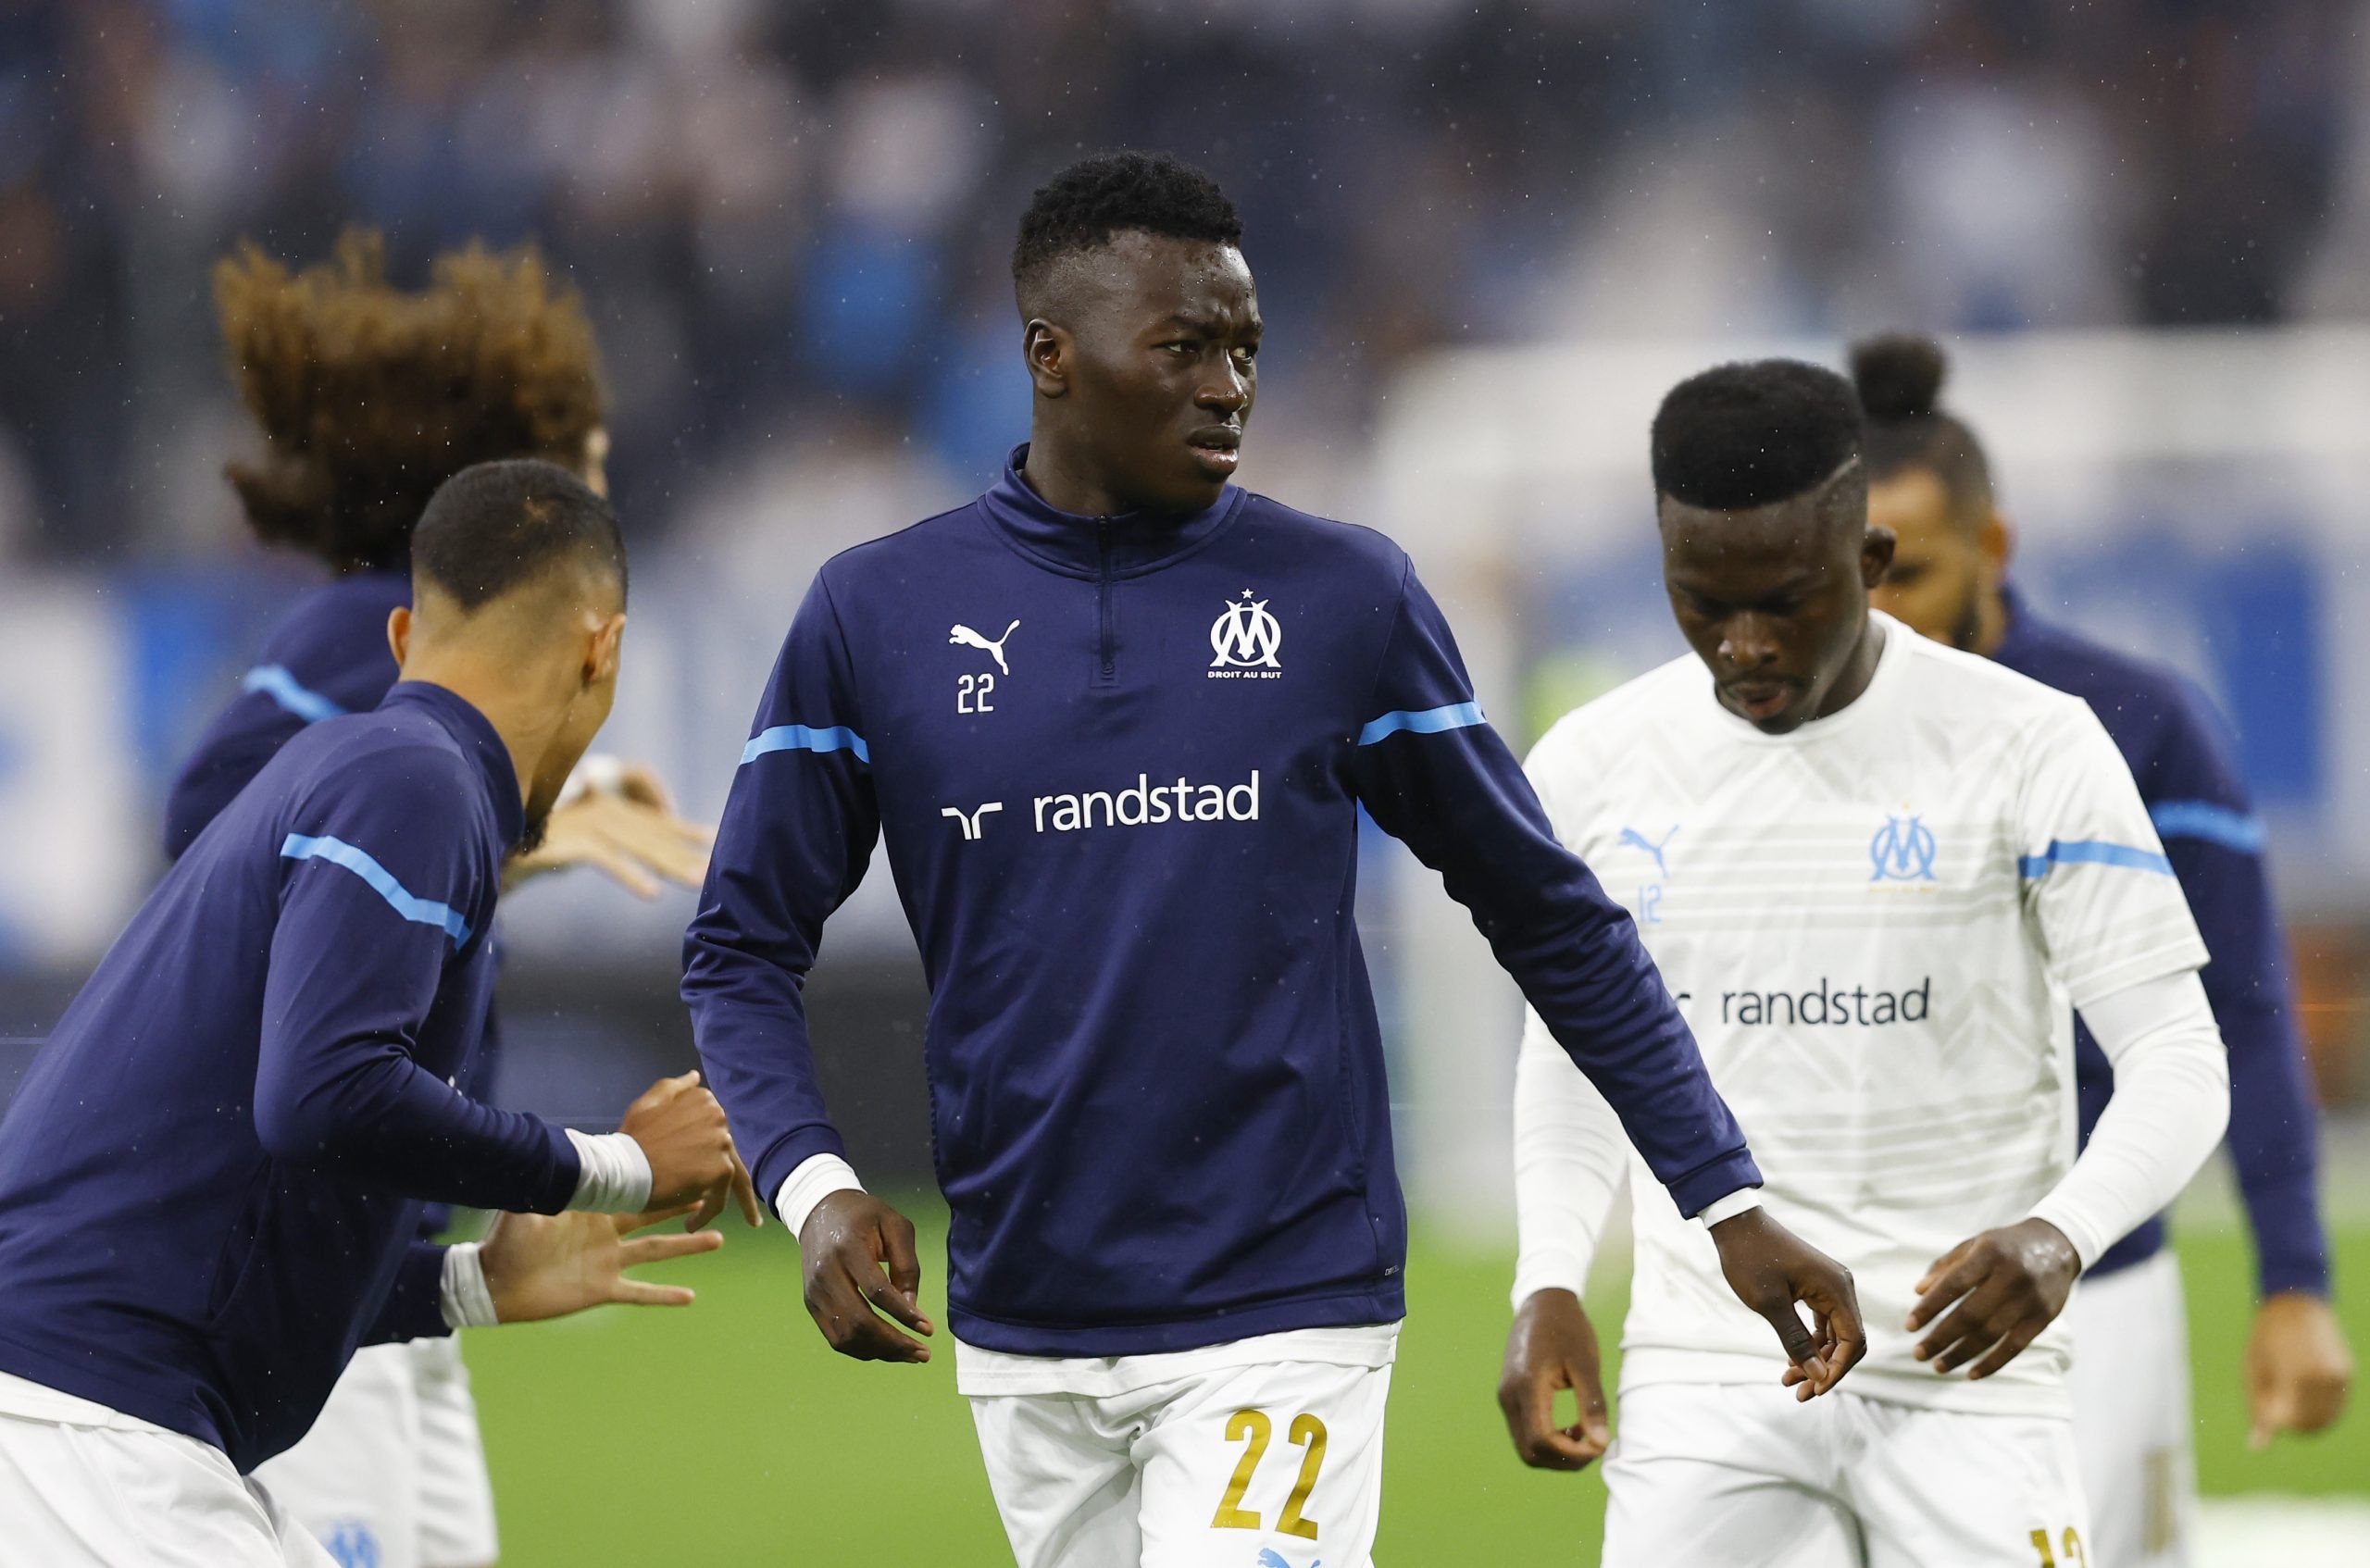 Soccer Football - Europa Conference League - Semi Final - Second Leg - Olympique de Marseille v Feyenoord - Orange Velodrome, Marseille, France - May 5, 2022 Olympique de Marseille's Pape Gueye with teammates during the warm up before the match REUTERS/Stephane Mahe